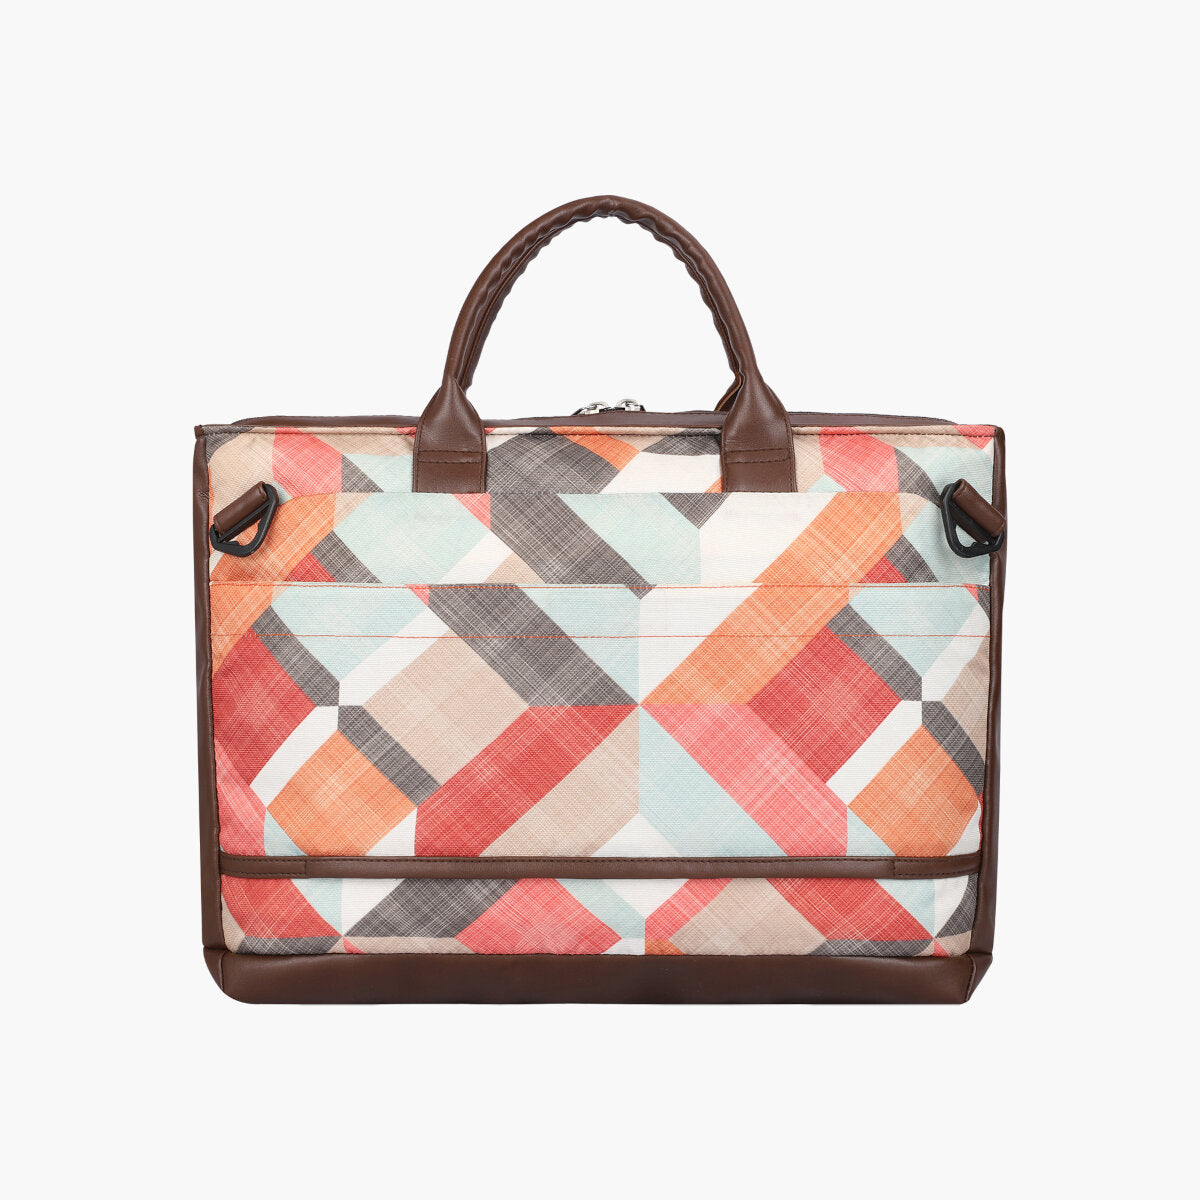 Geometric Print | Protecta Evenly Poised Office Laptop Bag for Women - 5